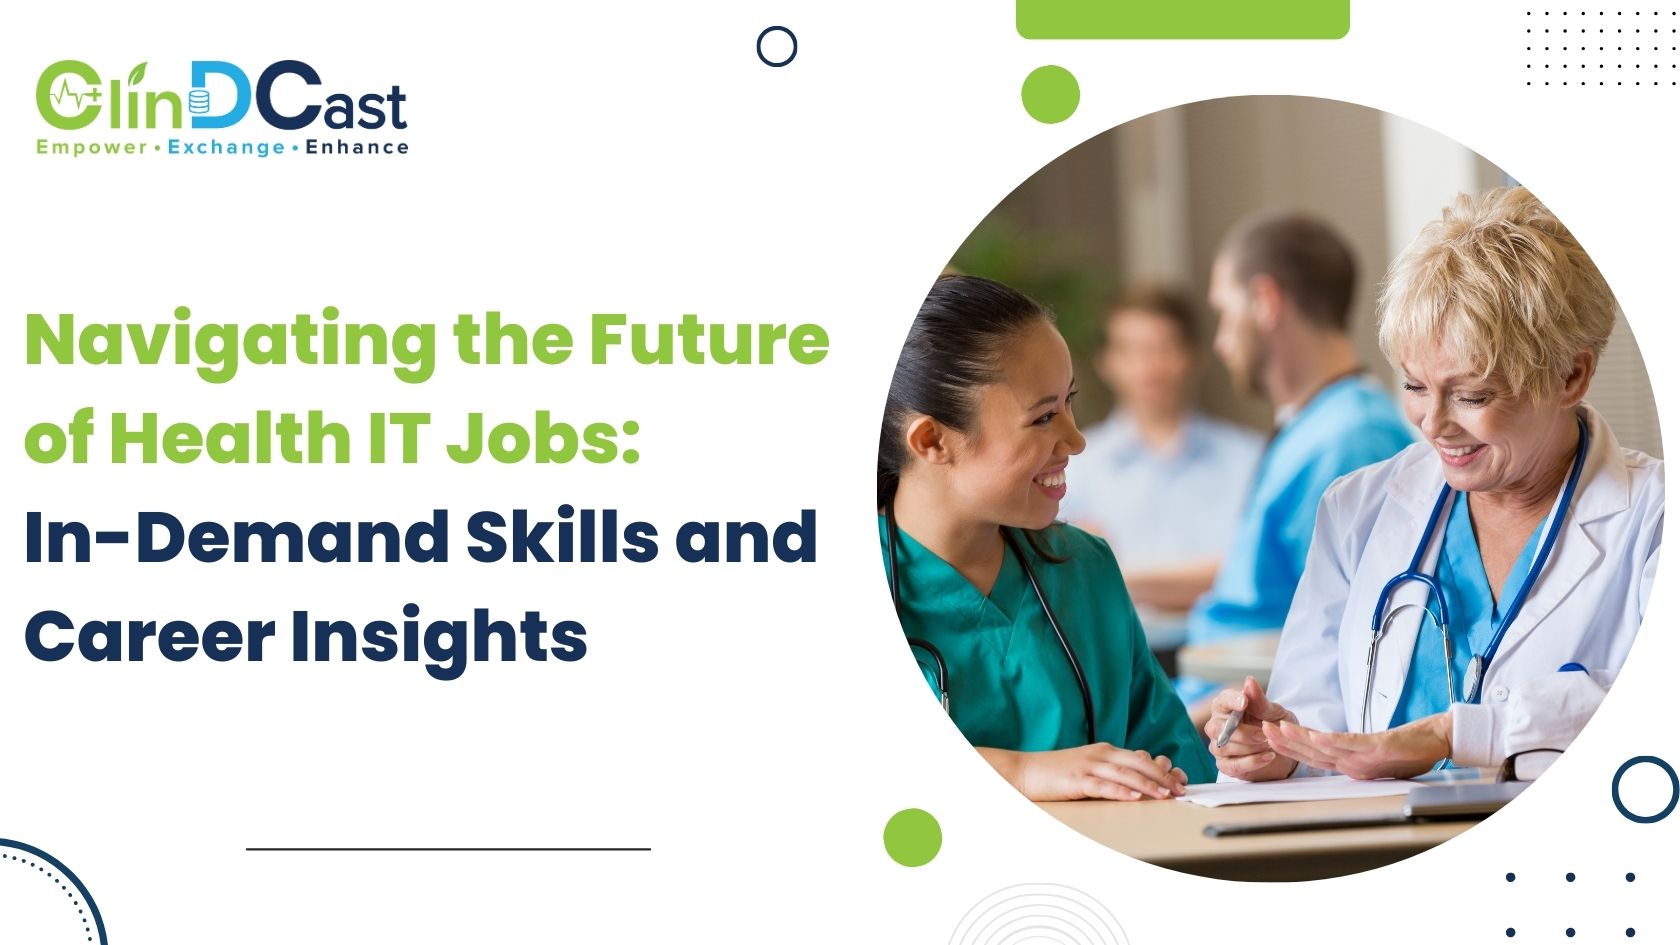 Navigating the Future of Health IT Jobs: In-Demand Skills and Career Insights